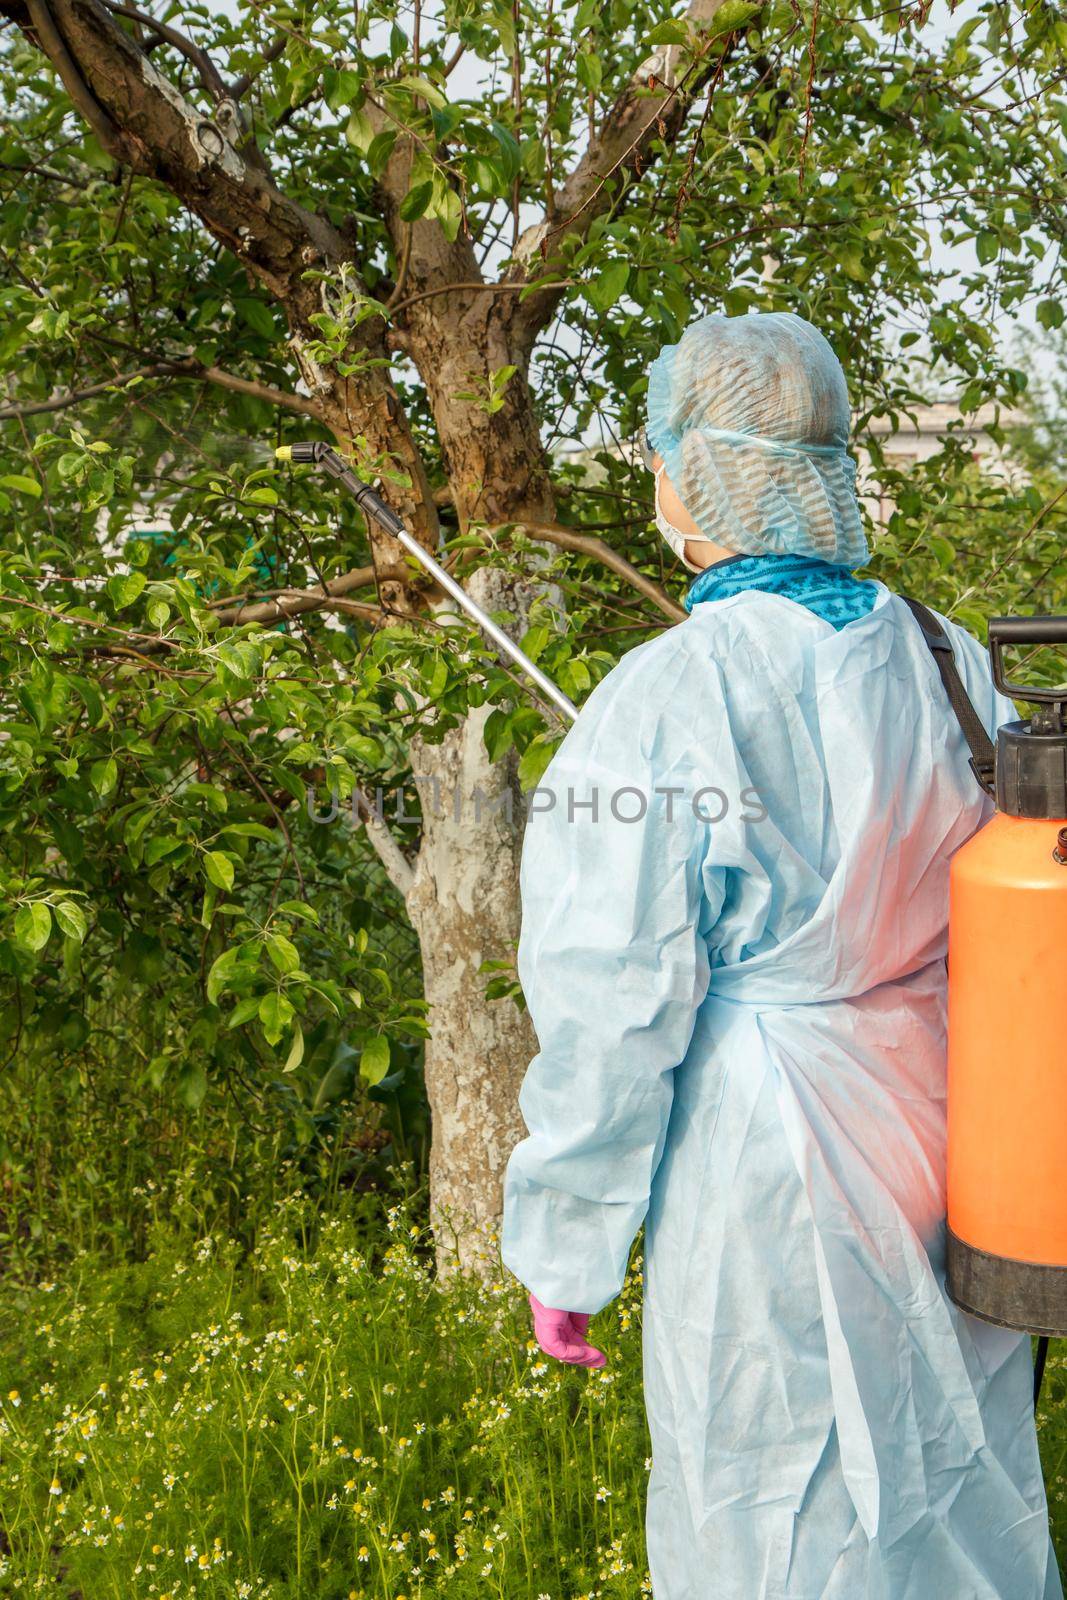 Protecting apple trees from fungal disease or vermin with pressure sprayer. by mvg6894